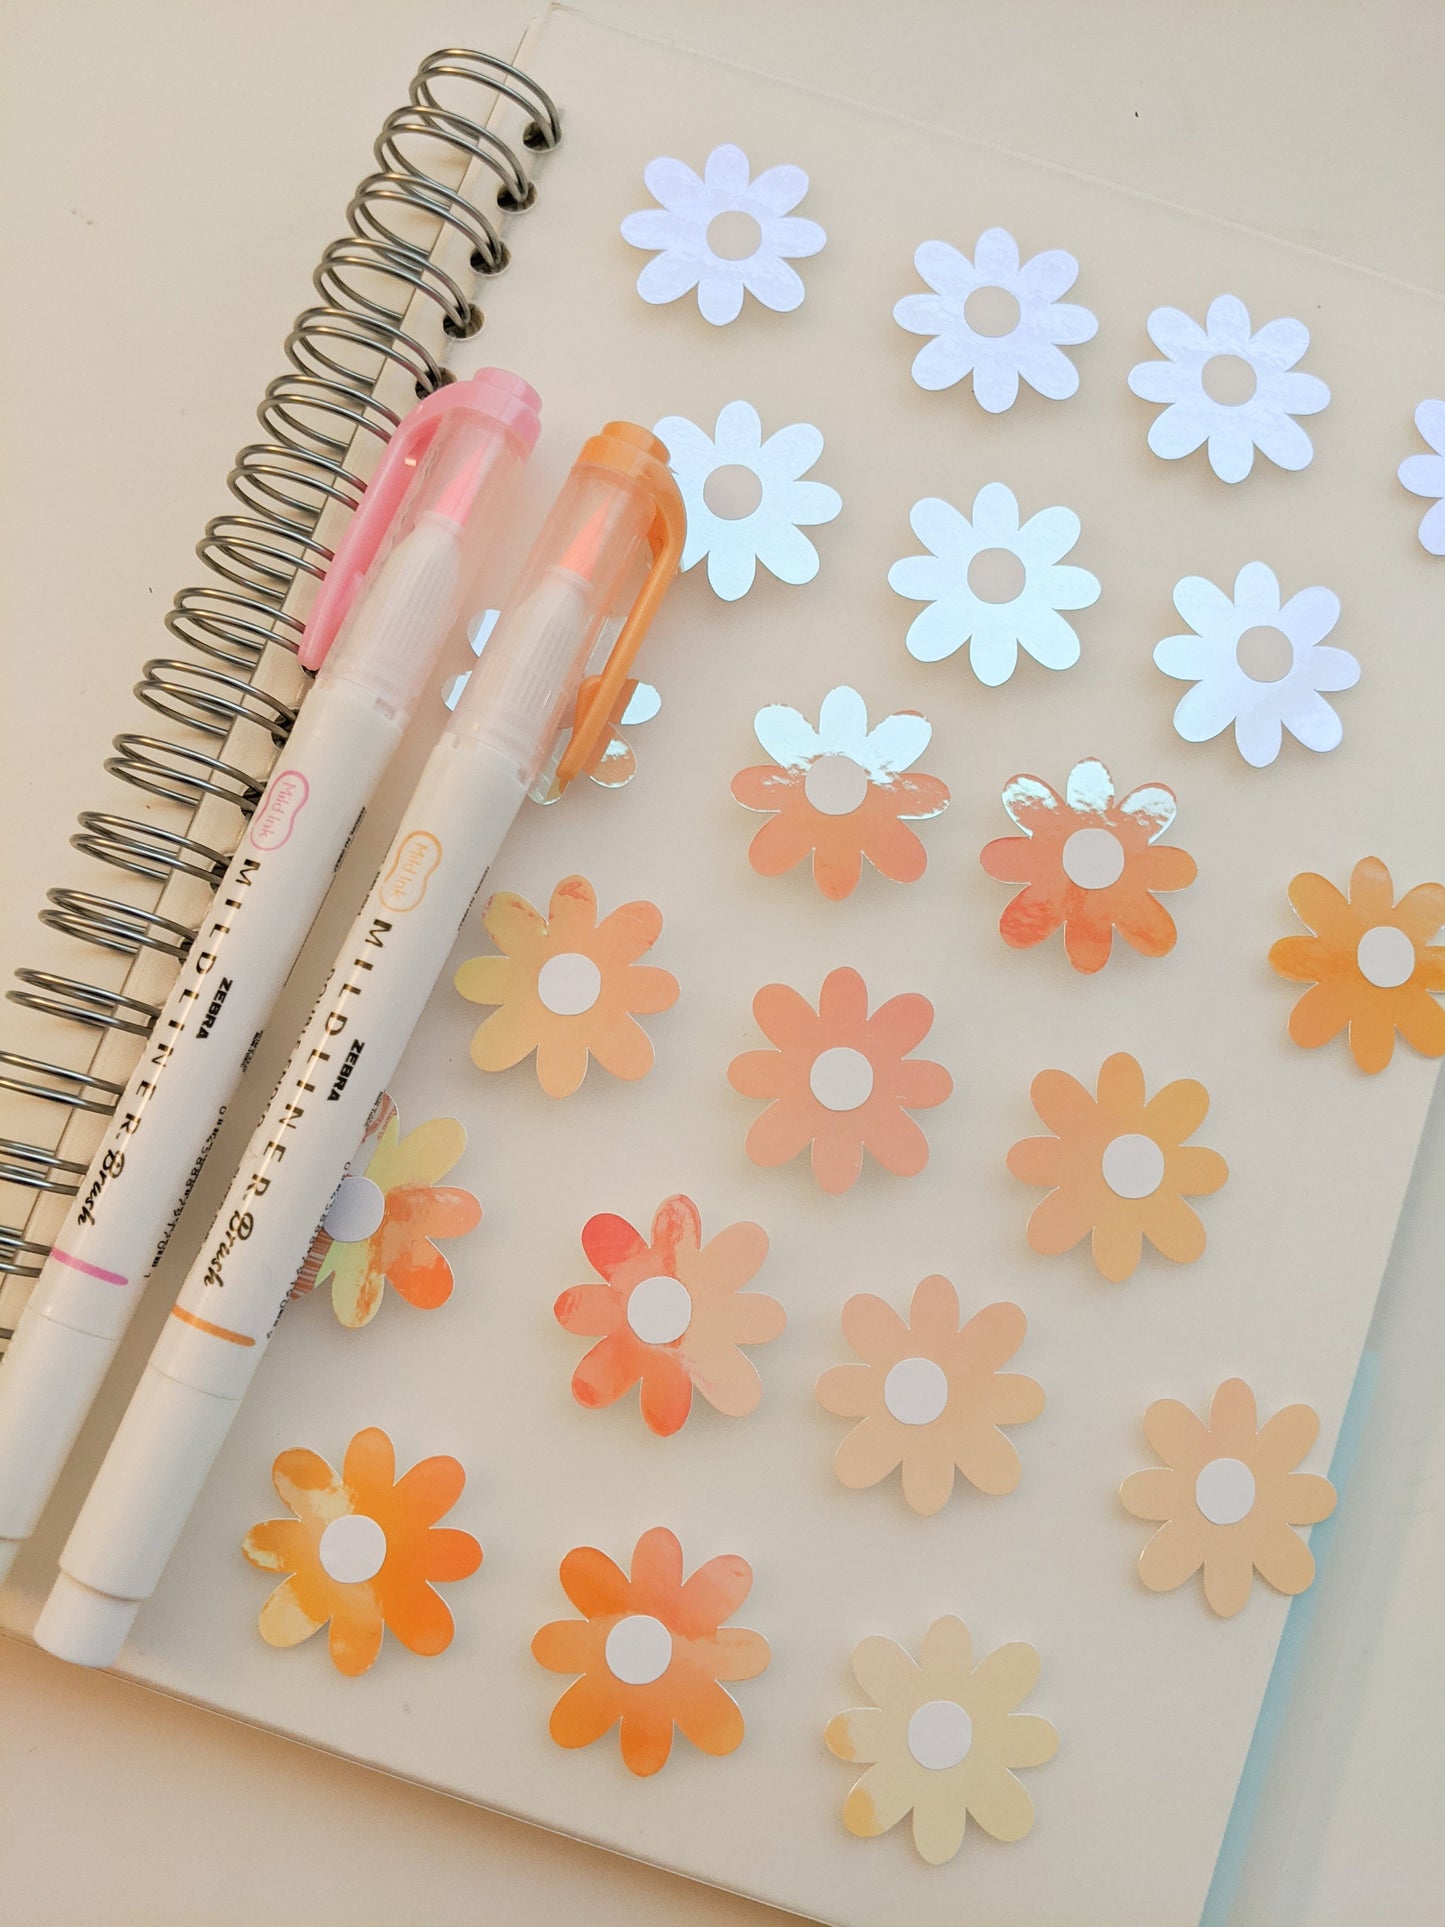 Sweet Daisy Vinyl Sheets to cover any smooth flat surface!